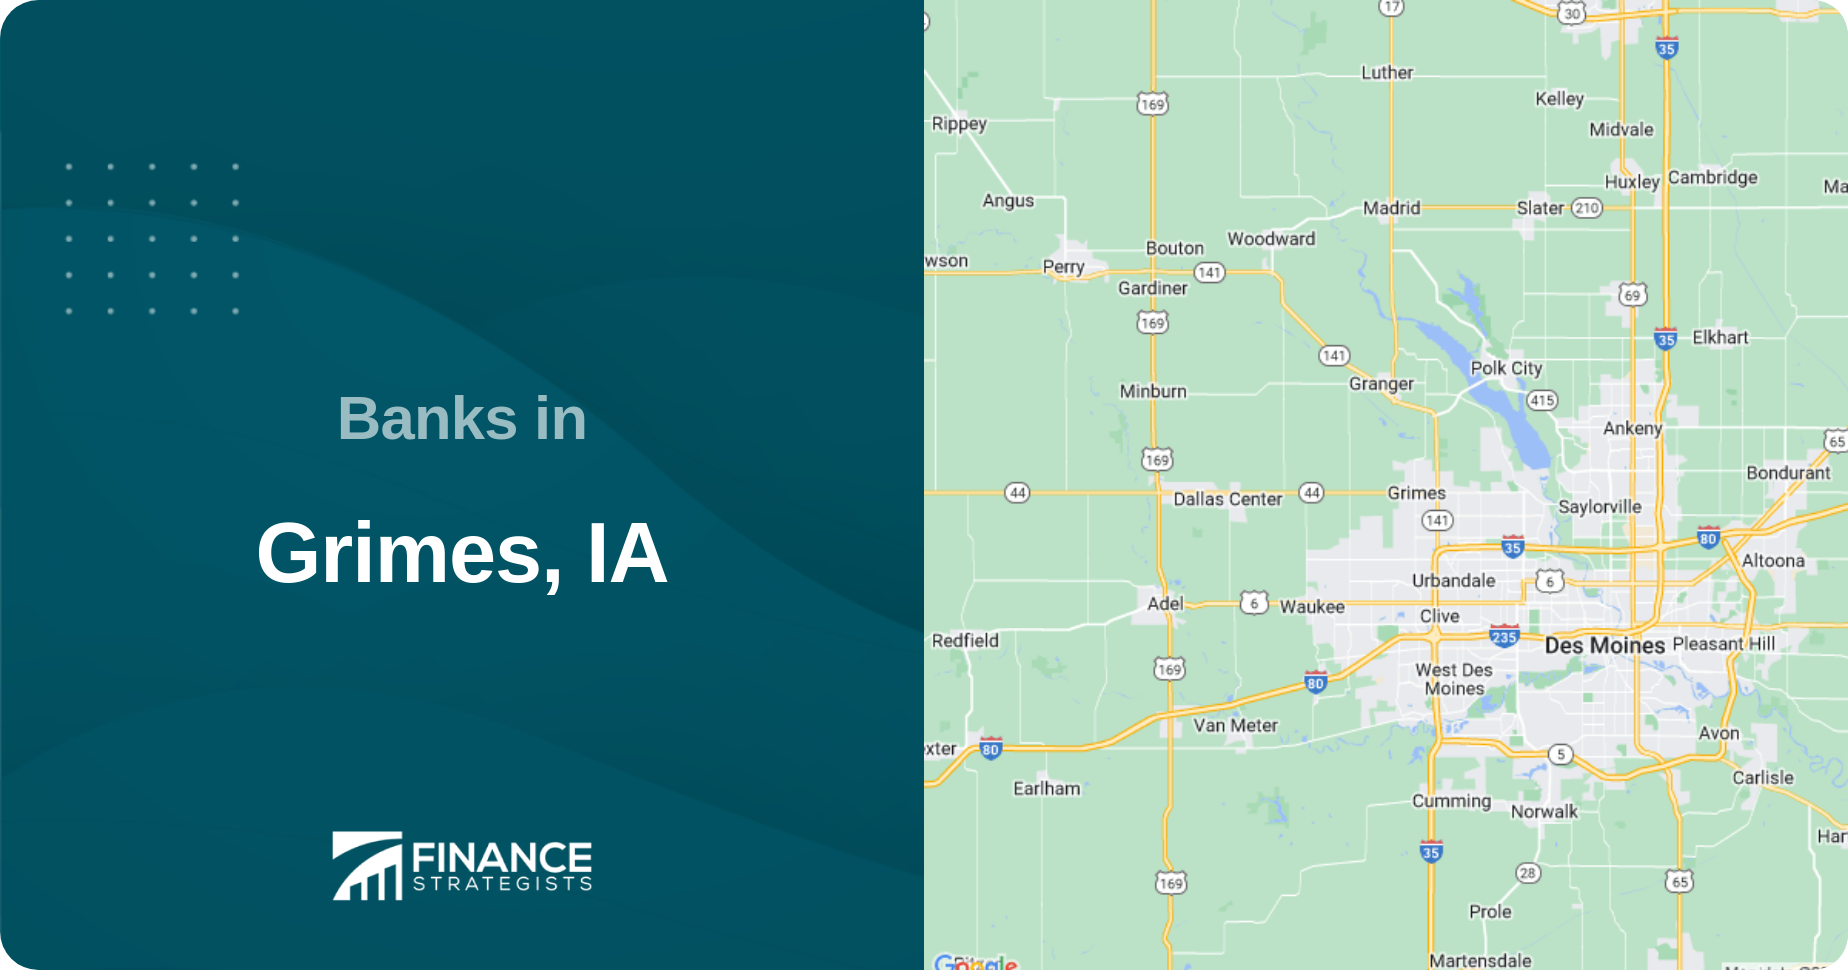 Banks in Grimes, IA